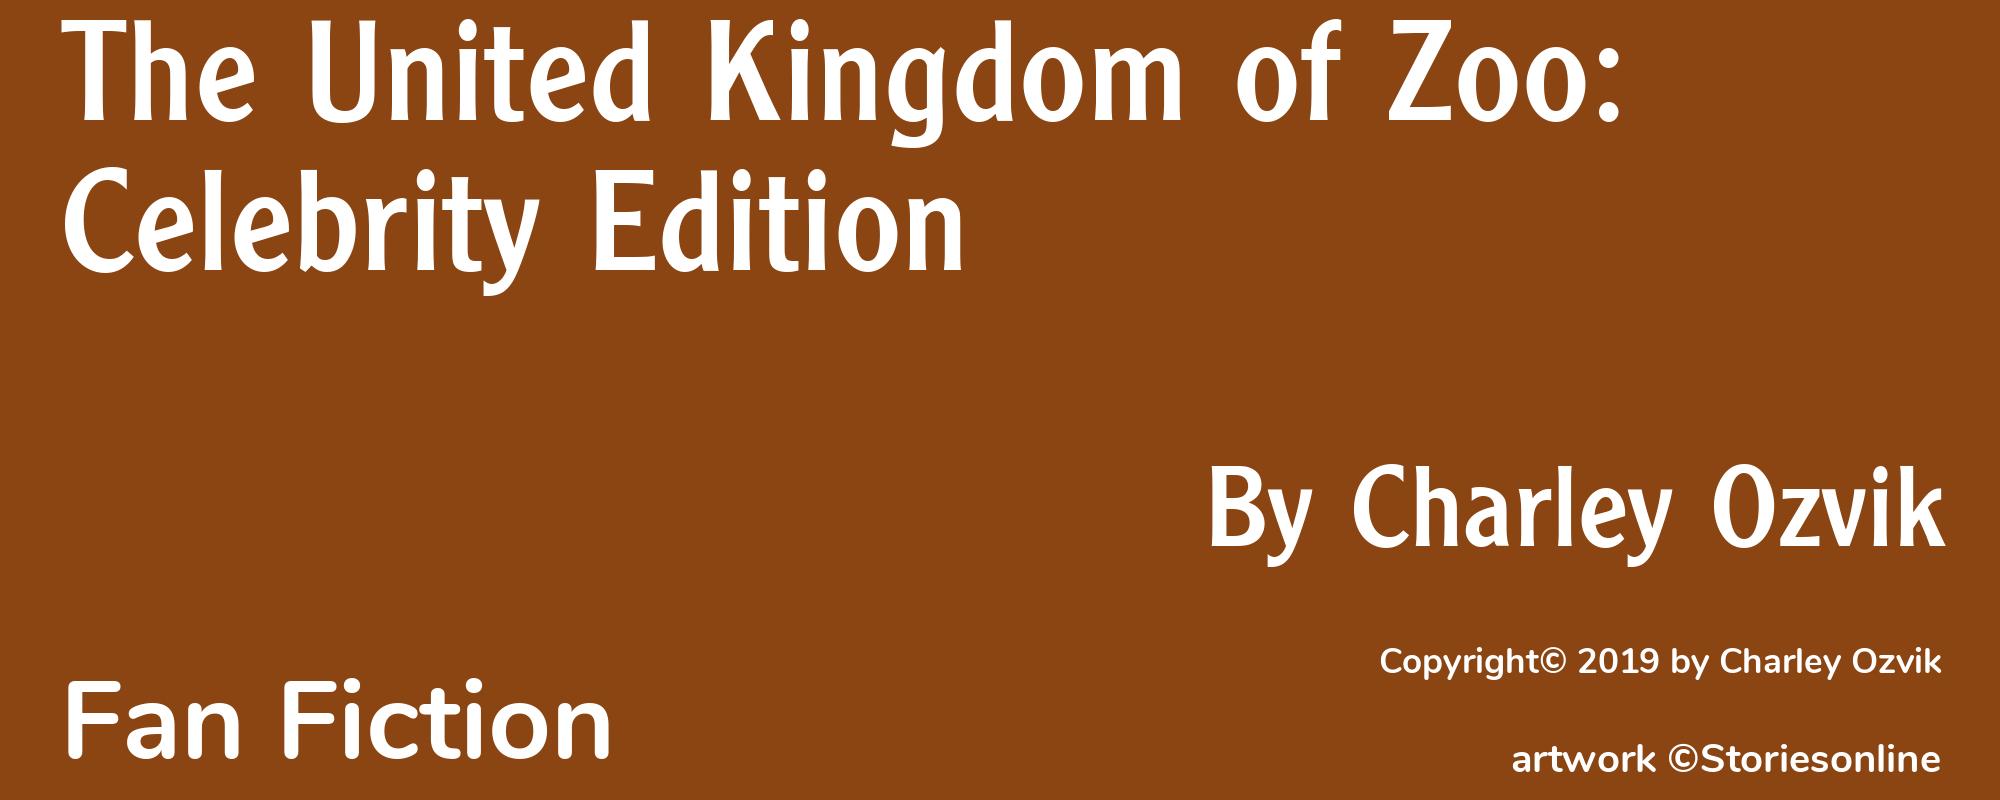 The United Kingdom of Zoo: Celebrity Edition - Cover